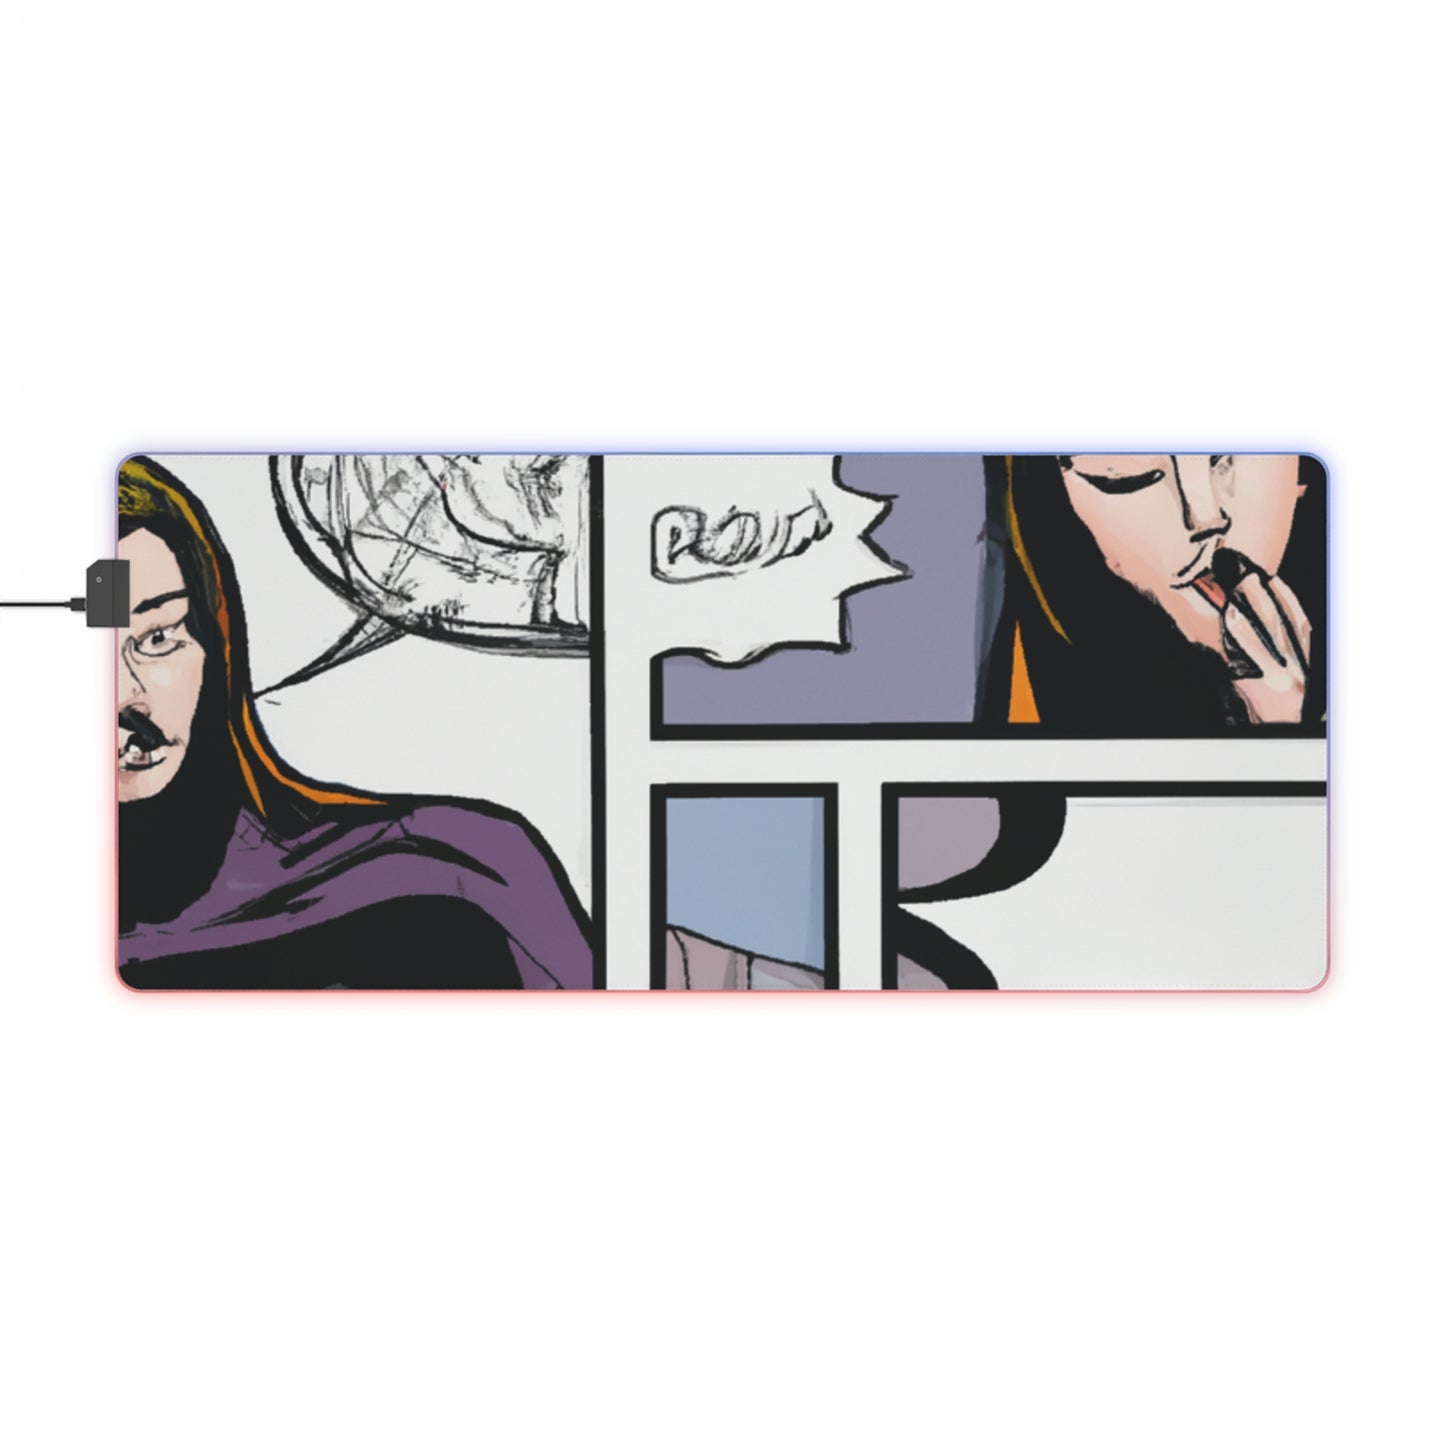 Billy Bob Buzzer - Comic Book Collector LED Light Up Gaming Mouse Pad